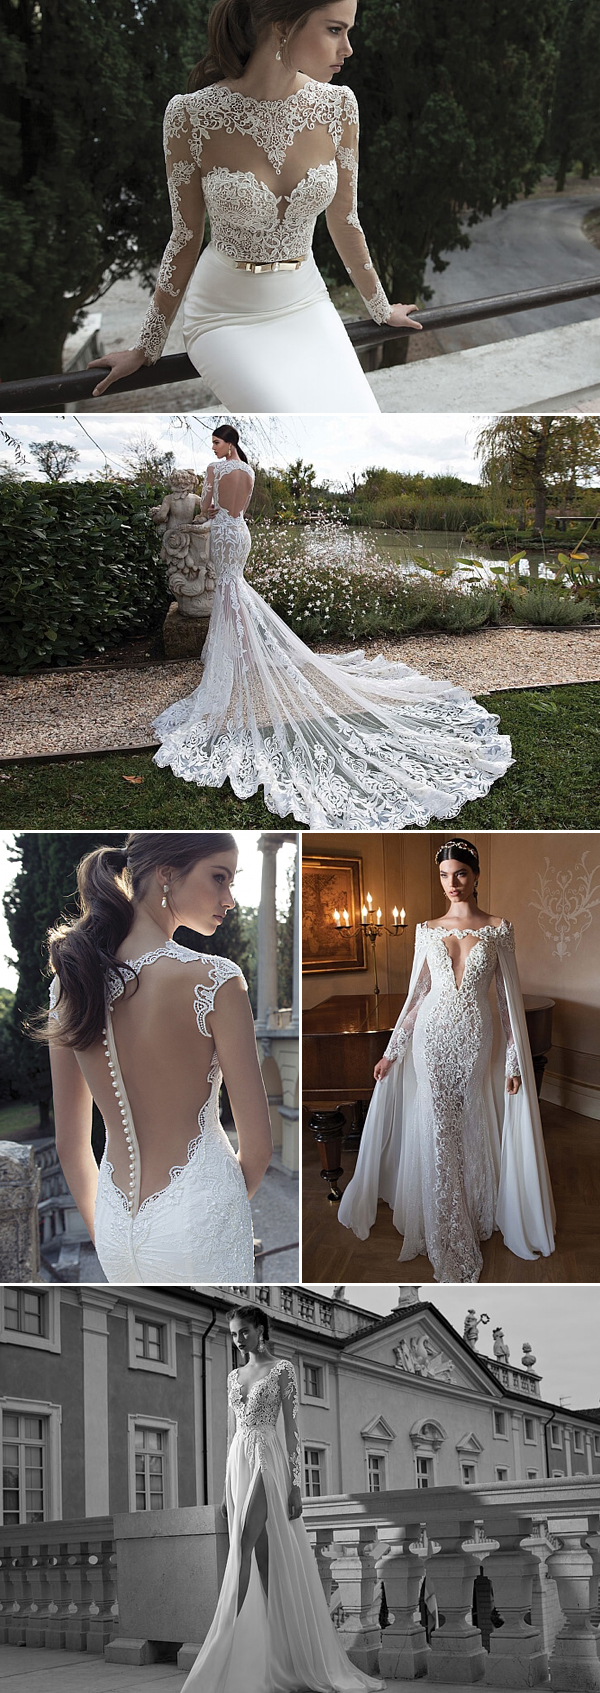 The Top 5 Israeli Wedding Dress Designers that Every Bride Should Know  About!